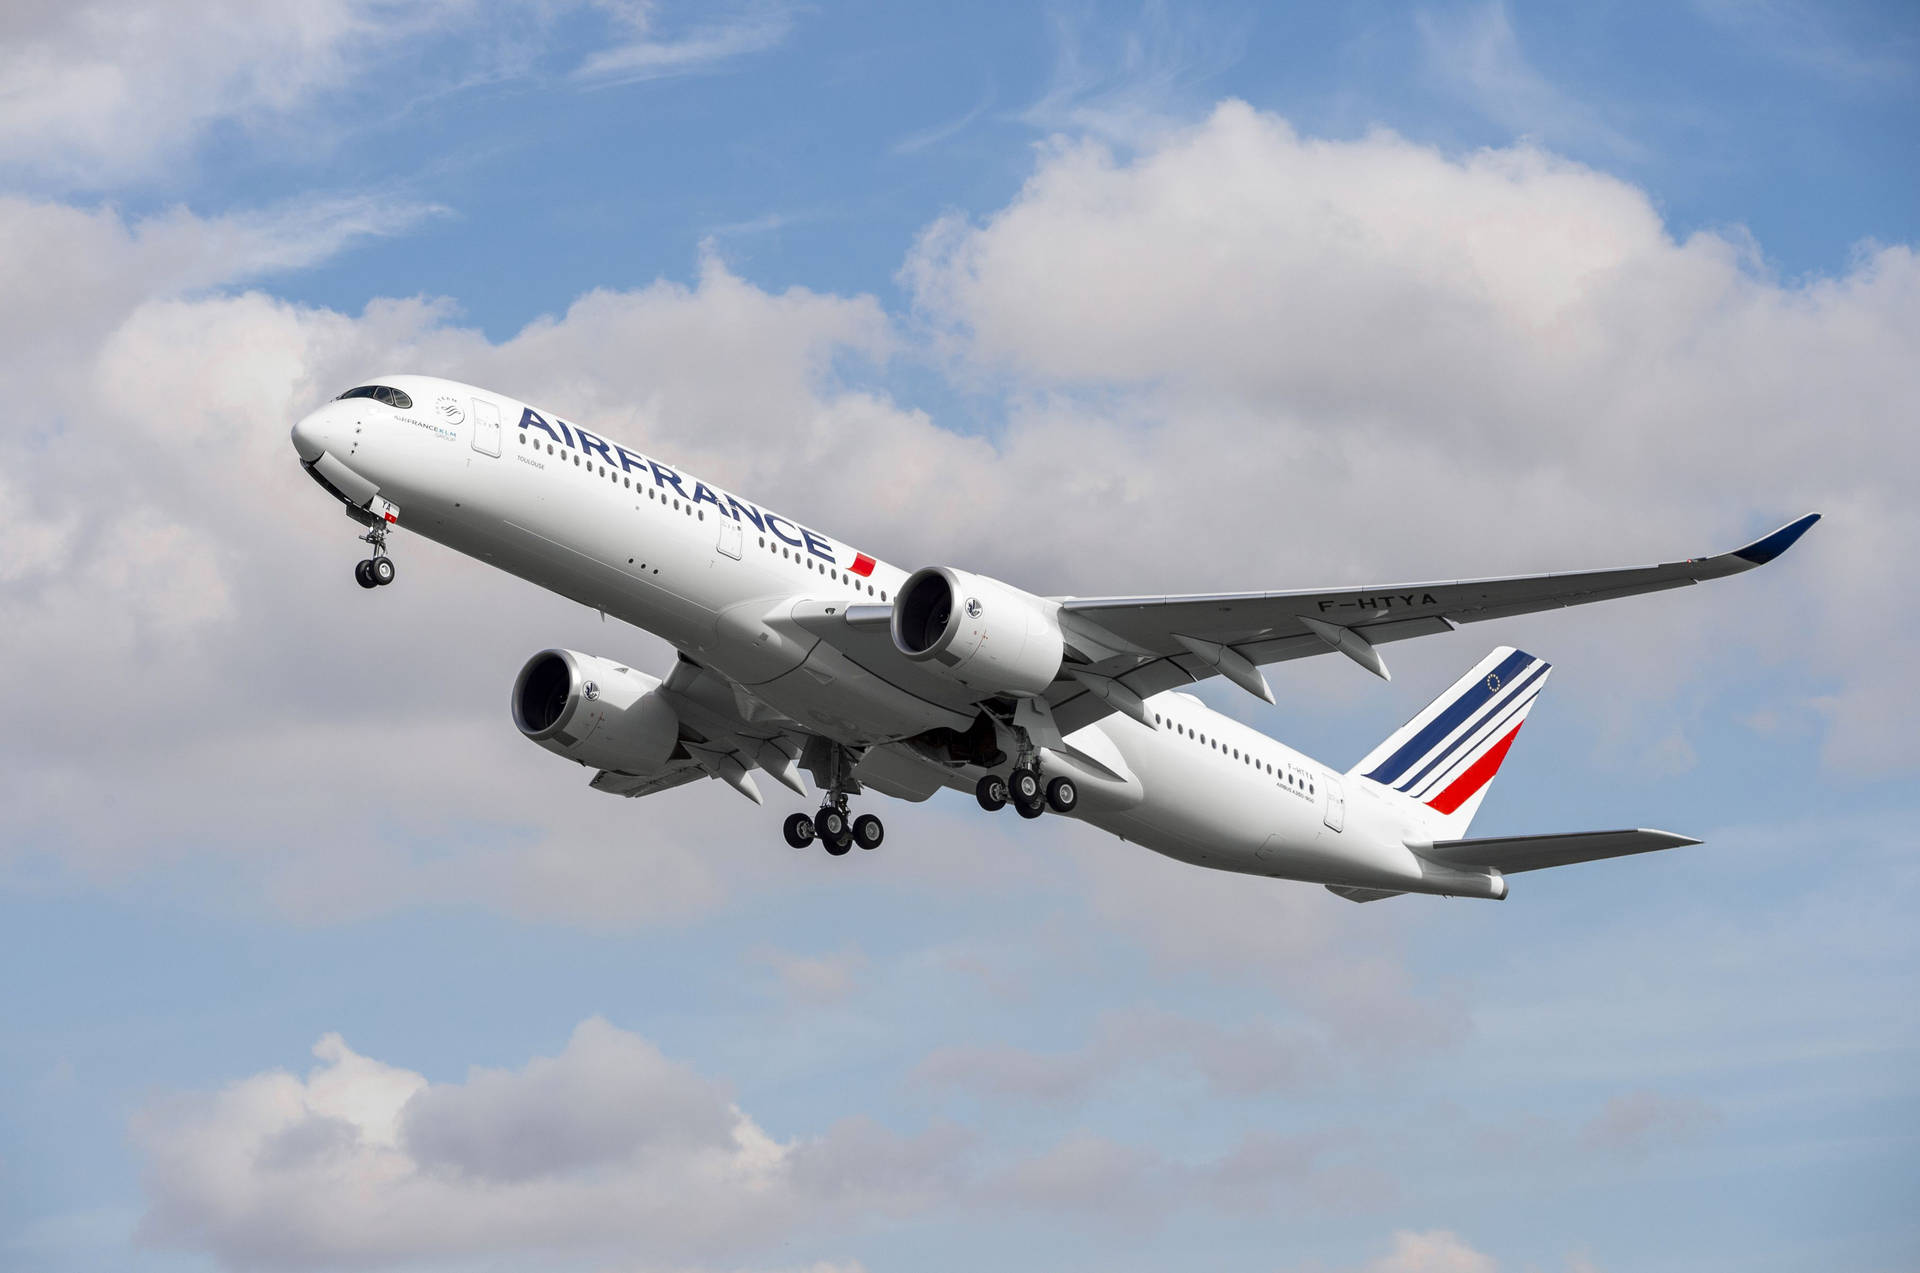 Air France Airbus A320 Plane Low Angle Shot Wallpaper